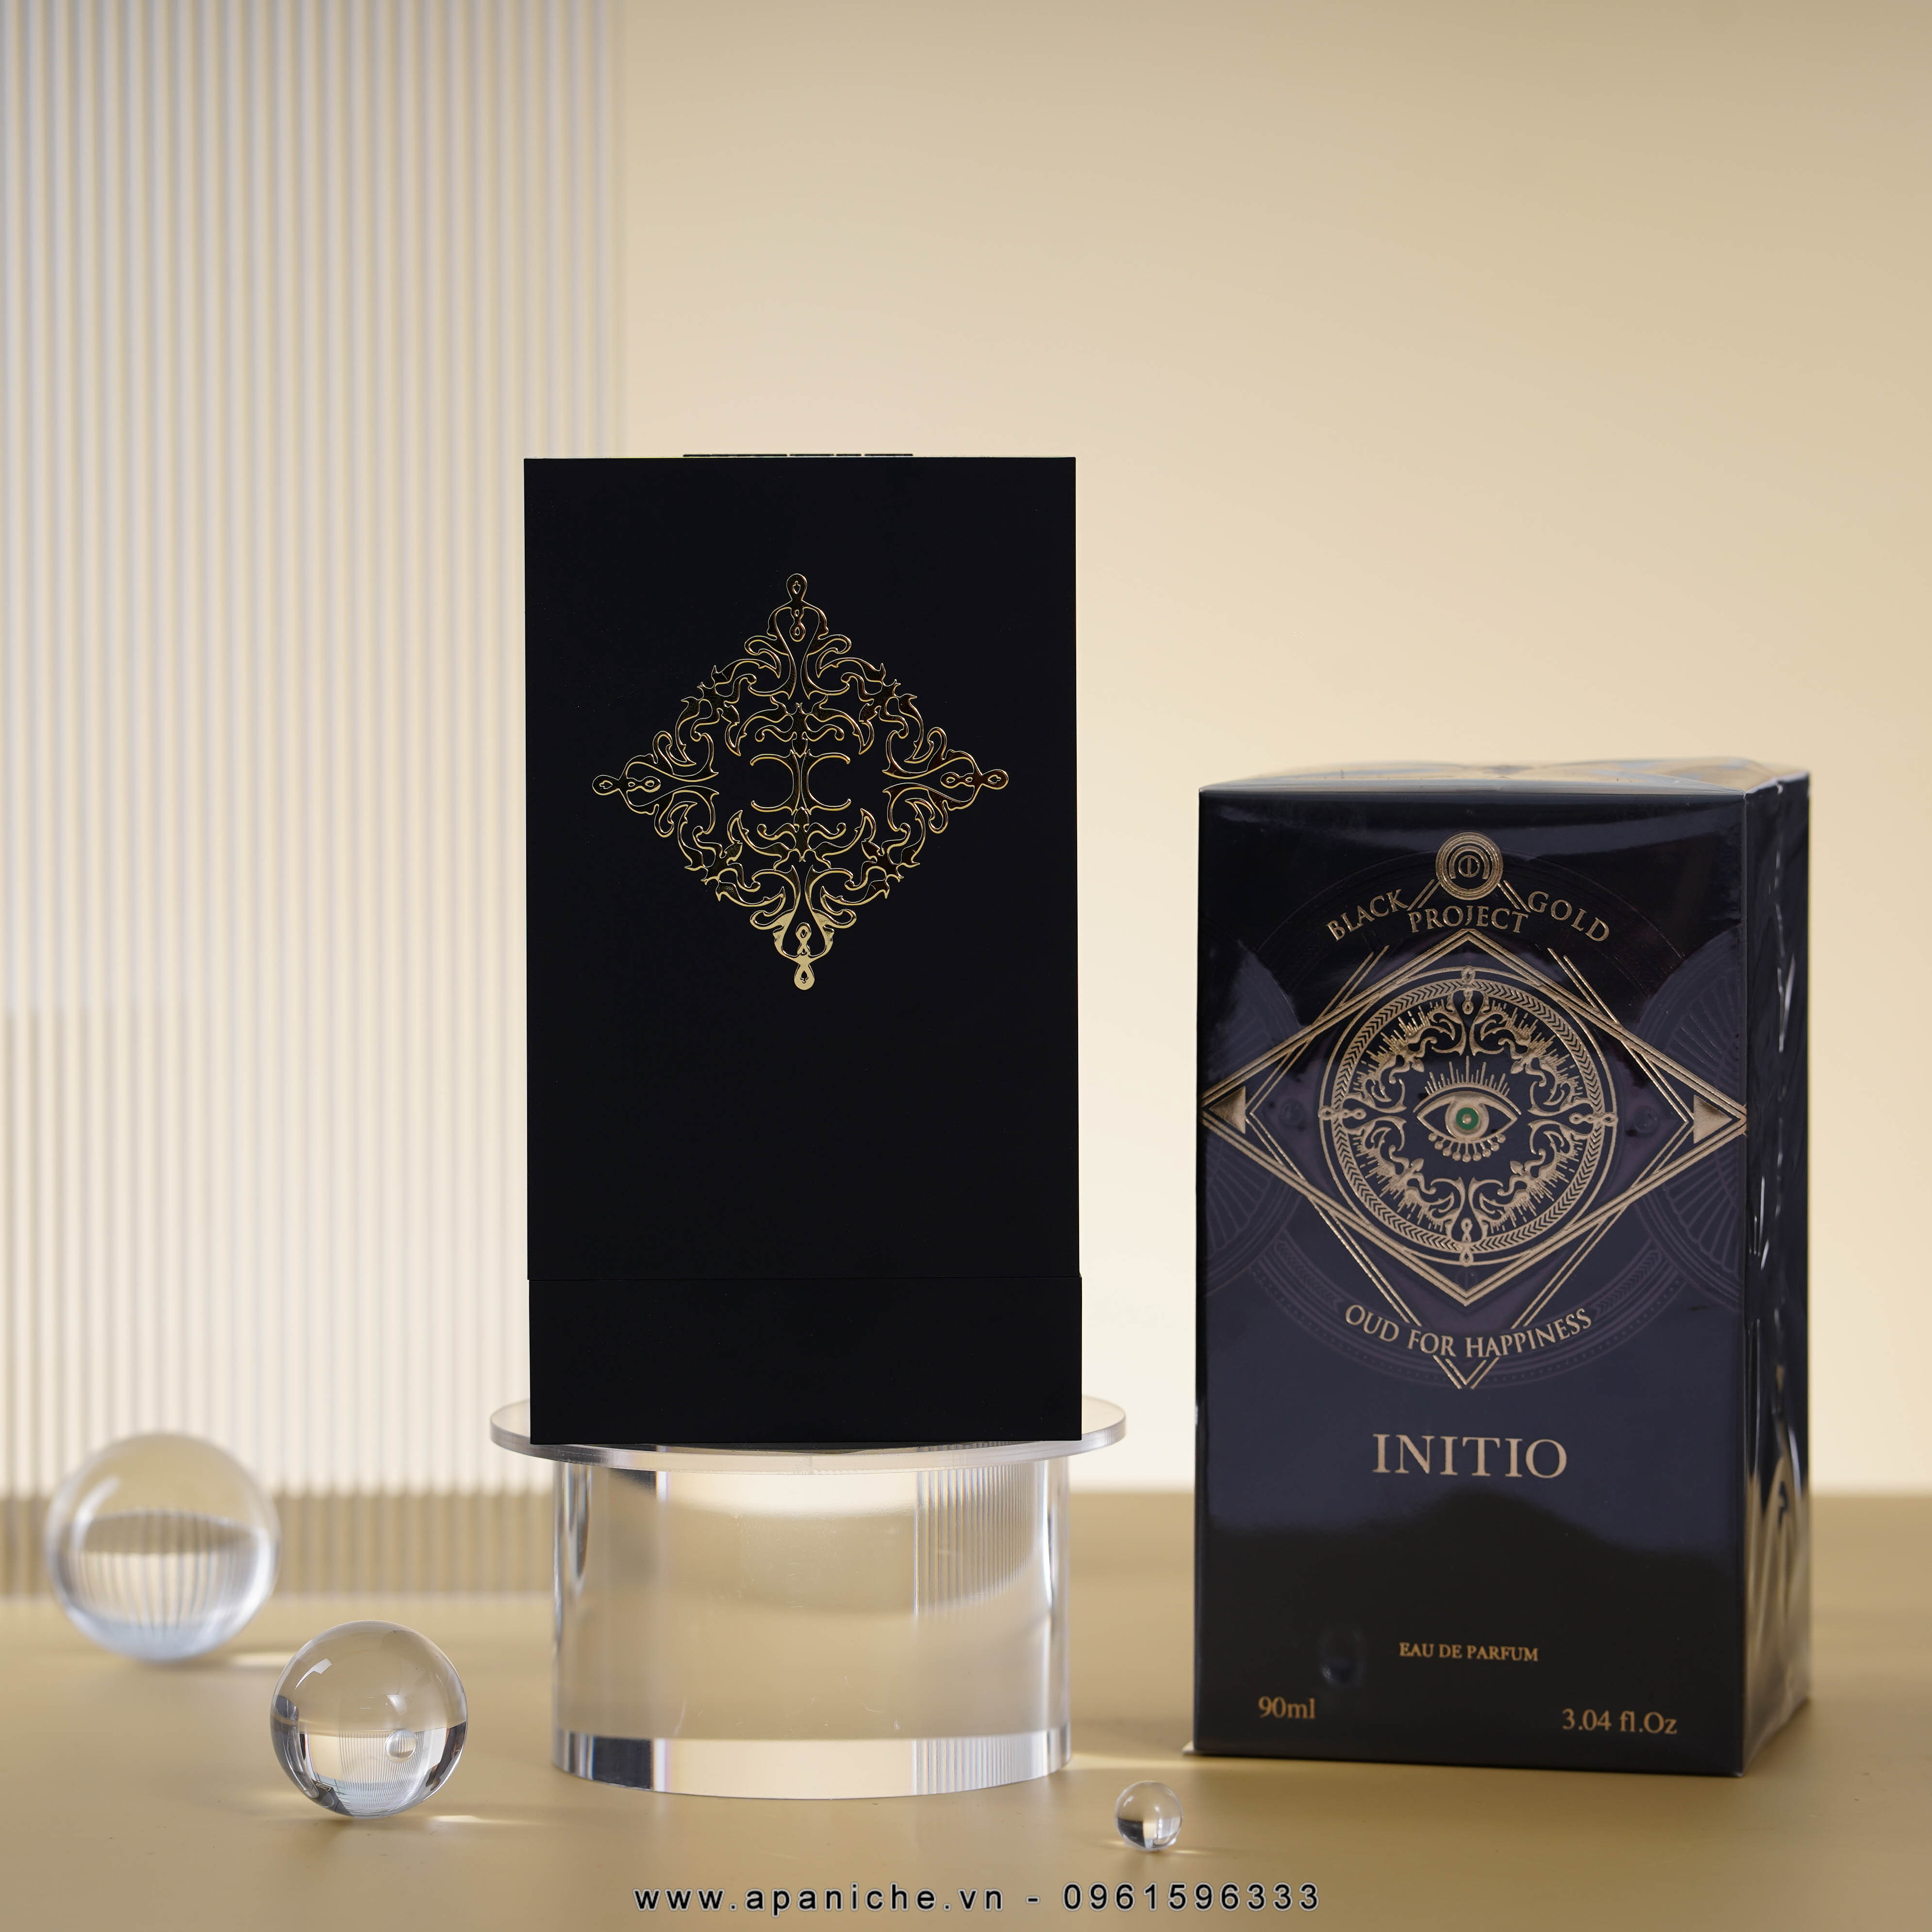 Initio-Parfums-Prives-Oud-For-Happiness-EDP-tai-ha-noi